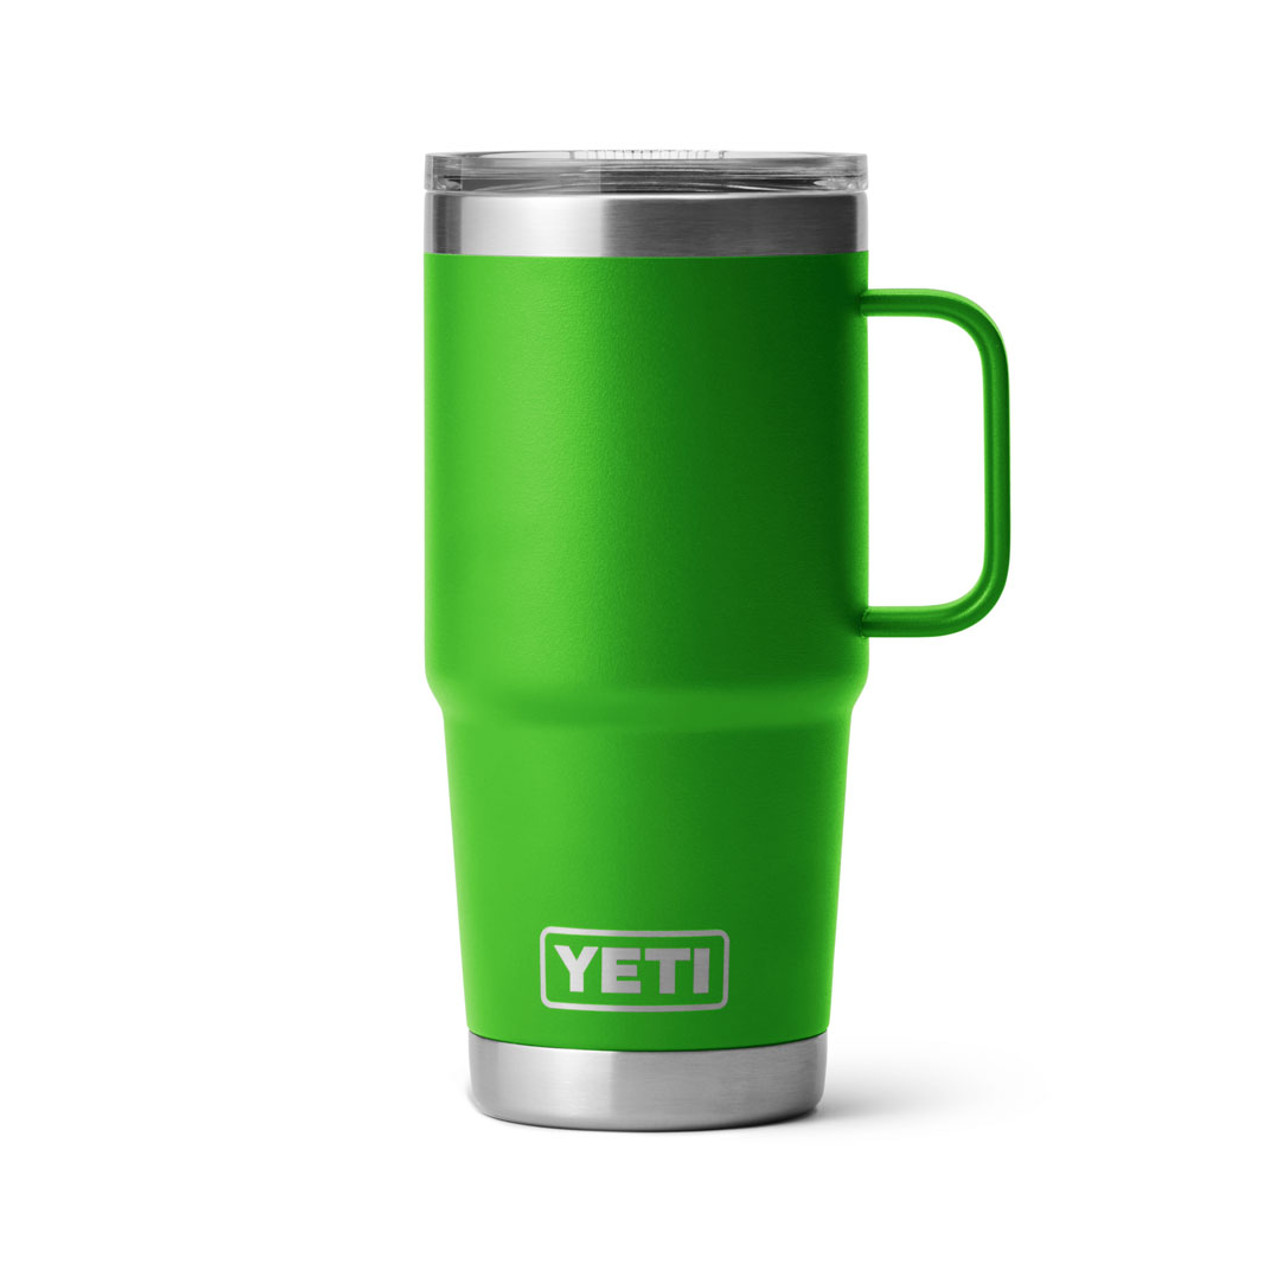 YETI Rambler Travel Mug with Straw Lid Comparison Strong Hold Lid Rescue  Red & Canopy Green 